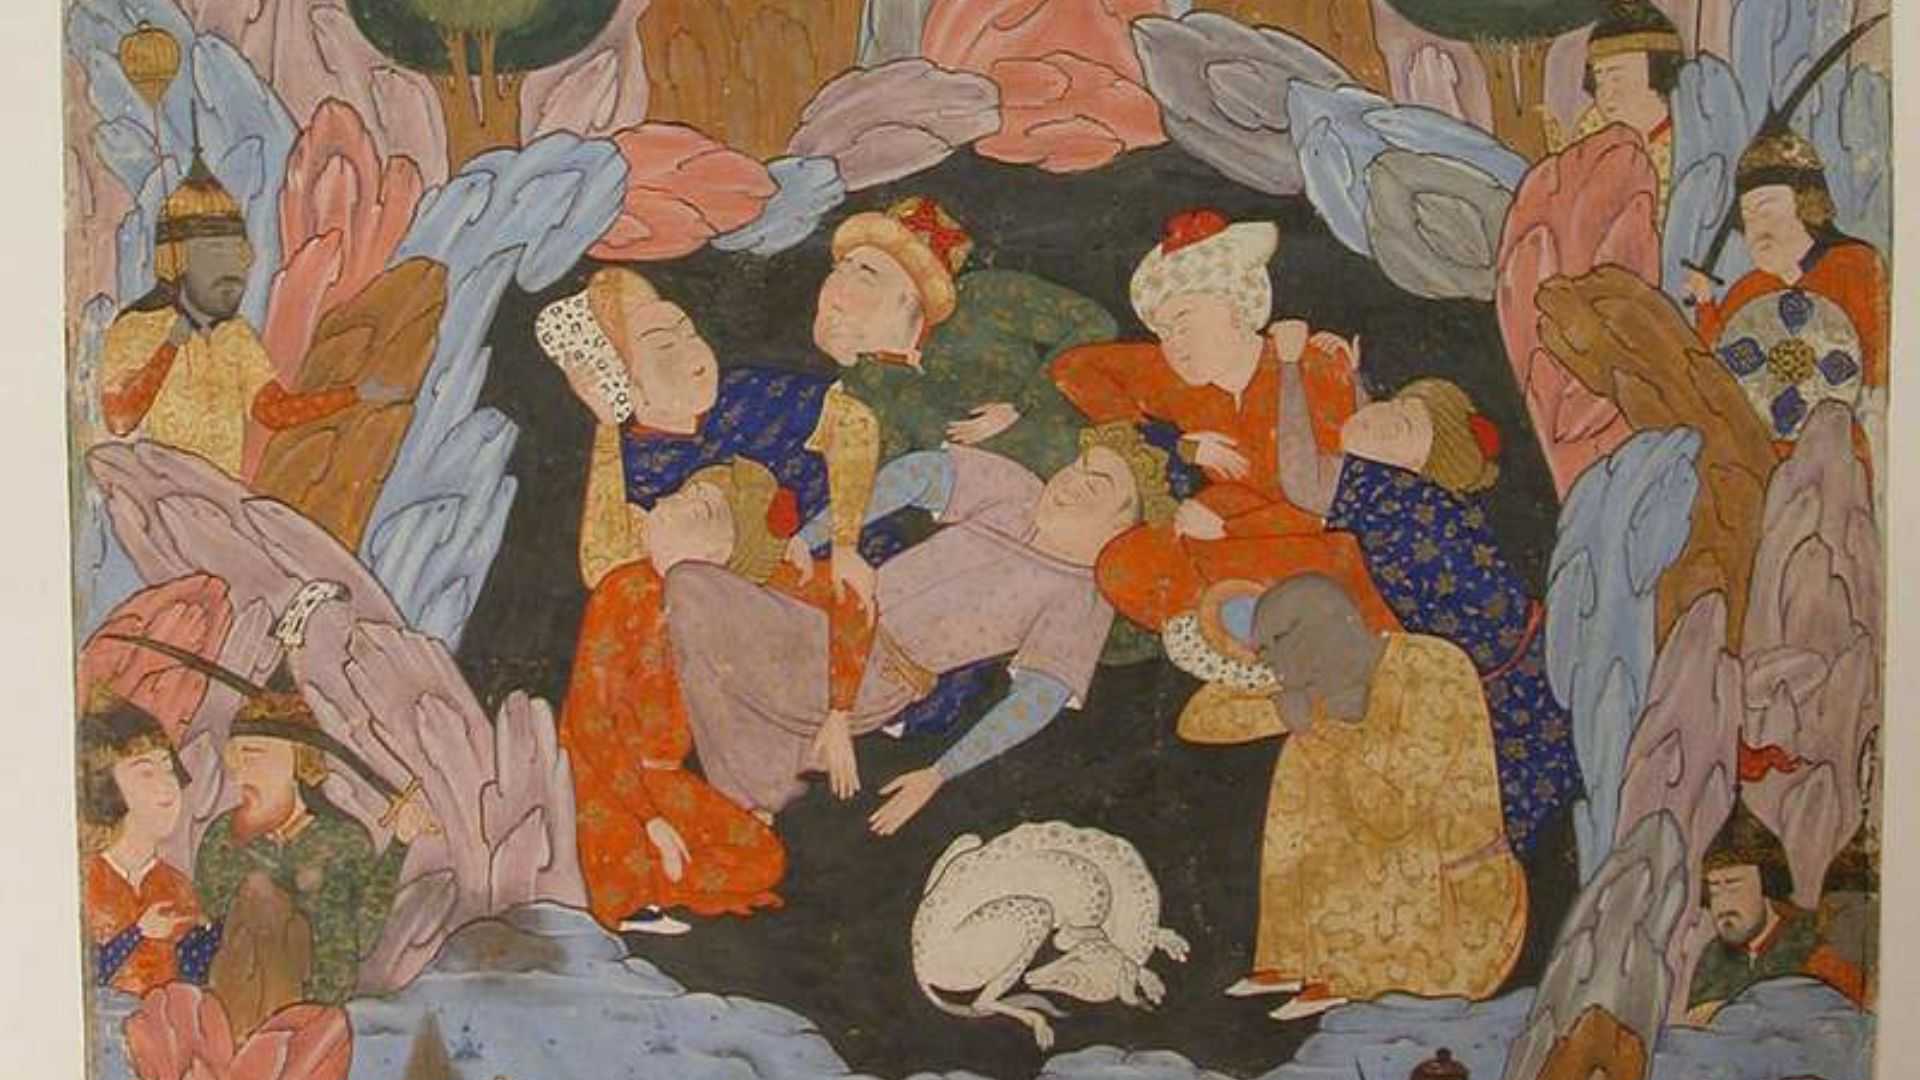 Story of Seven Sleepers in Islam